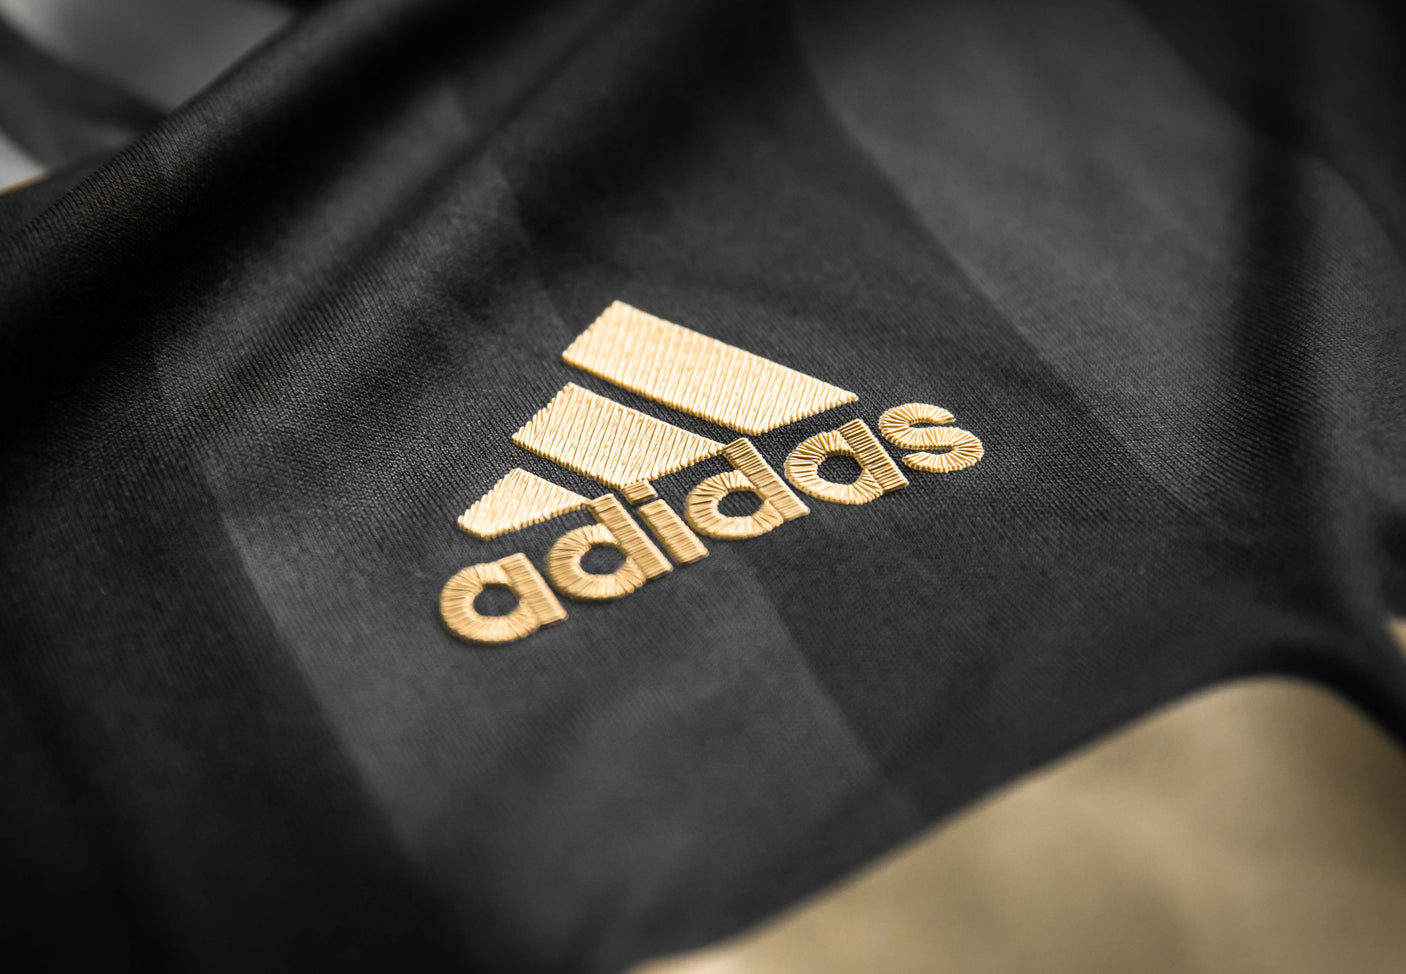 adidas Men's LAFC 2020 Authentic Home Jersey Black/Gold